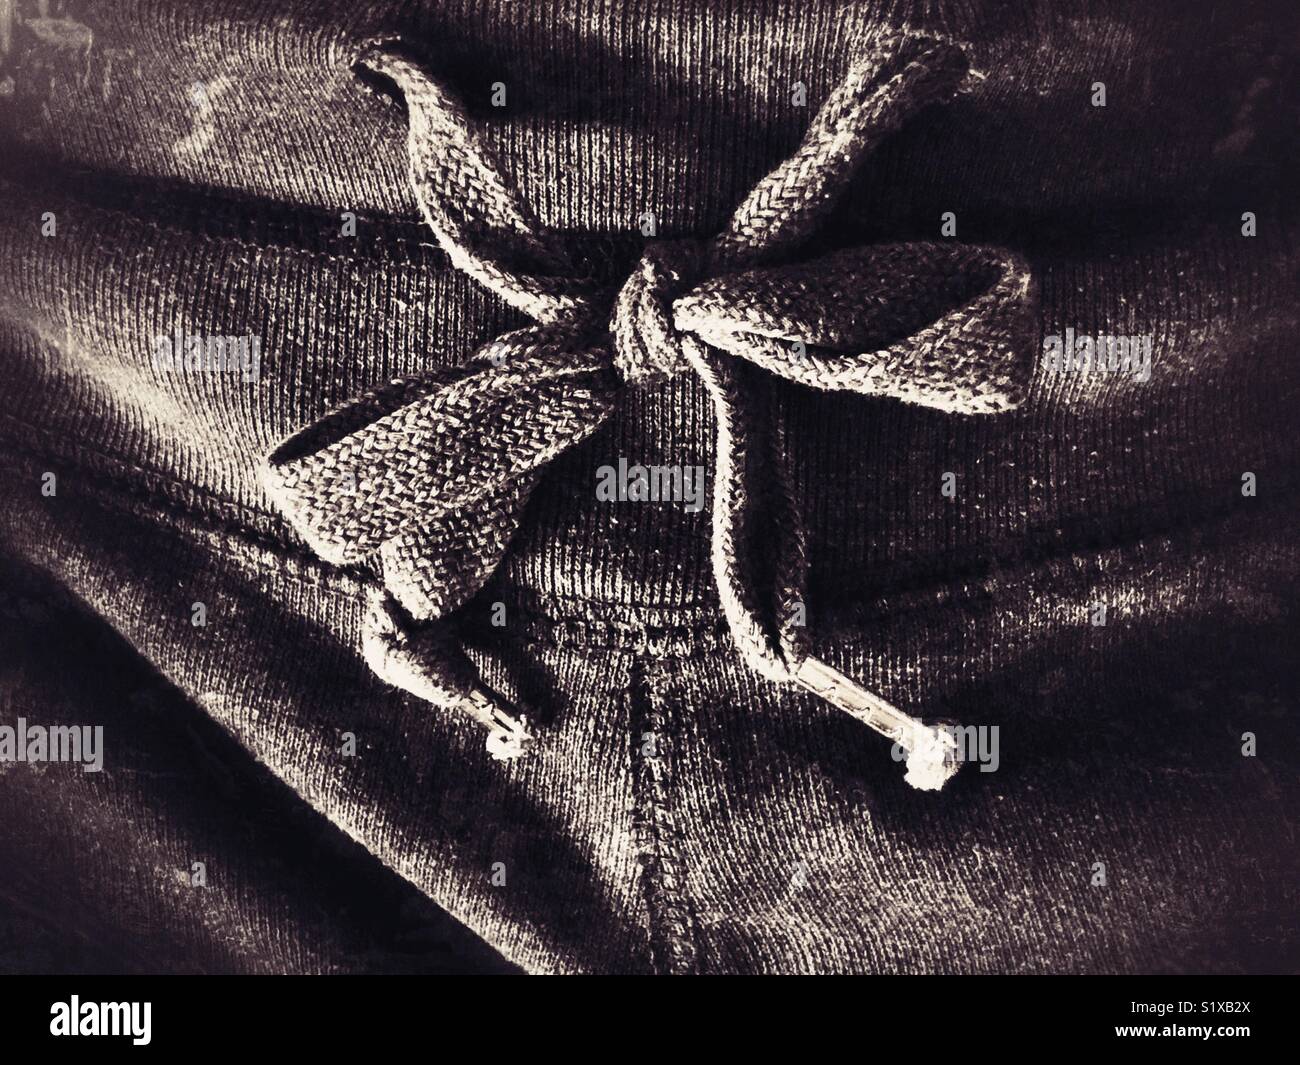 Closeup of grey fabric drawstring one sweatpants waistband loosely toed in a bow Stock Photo